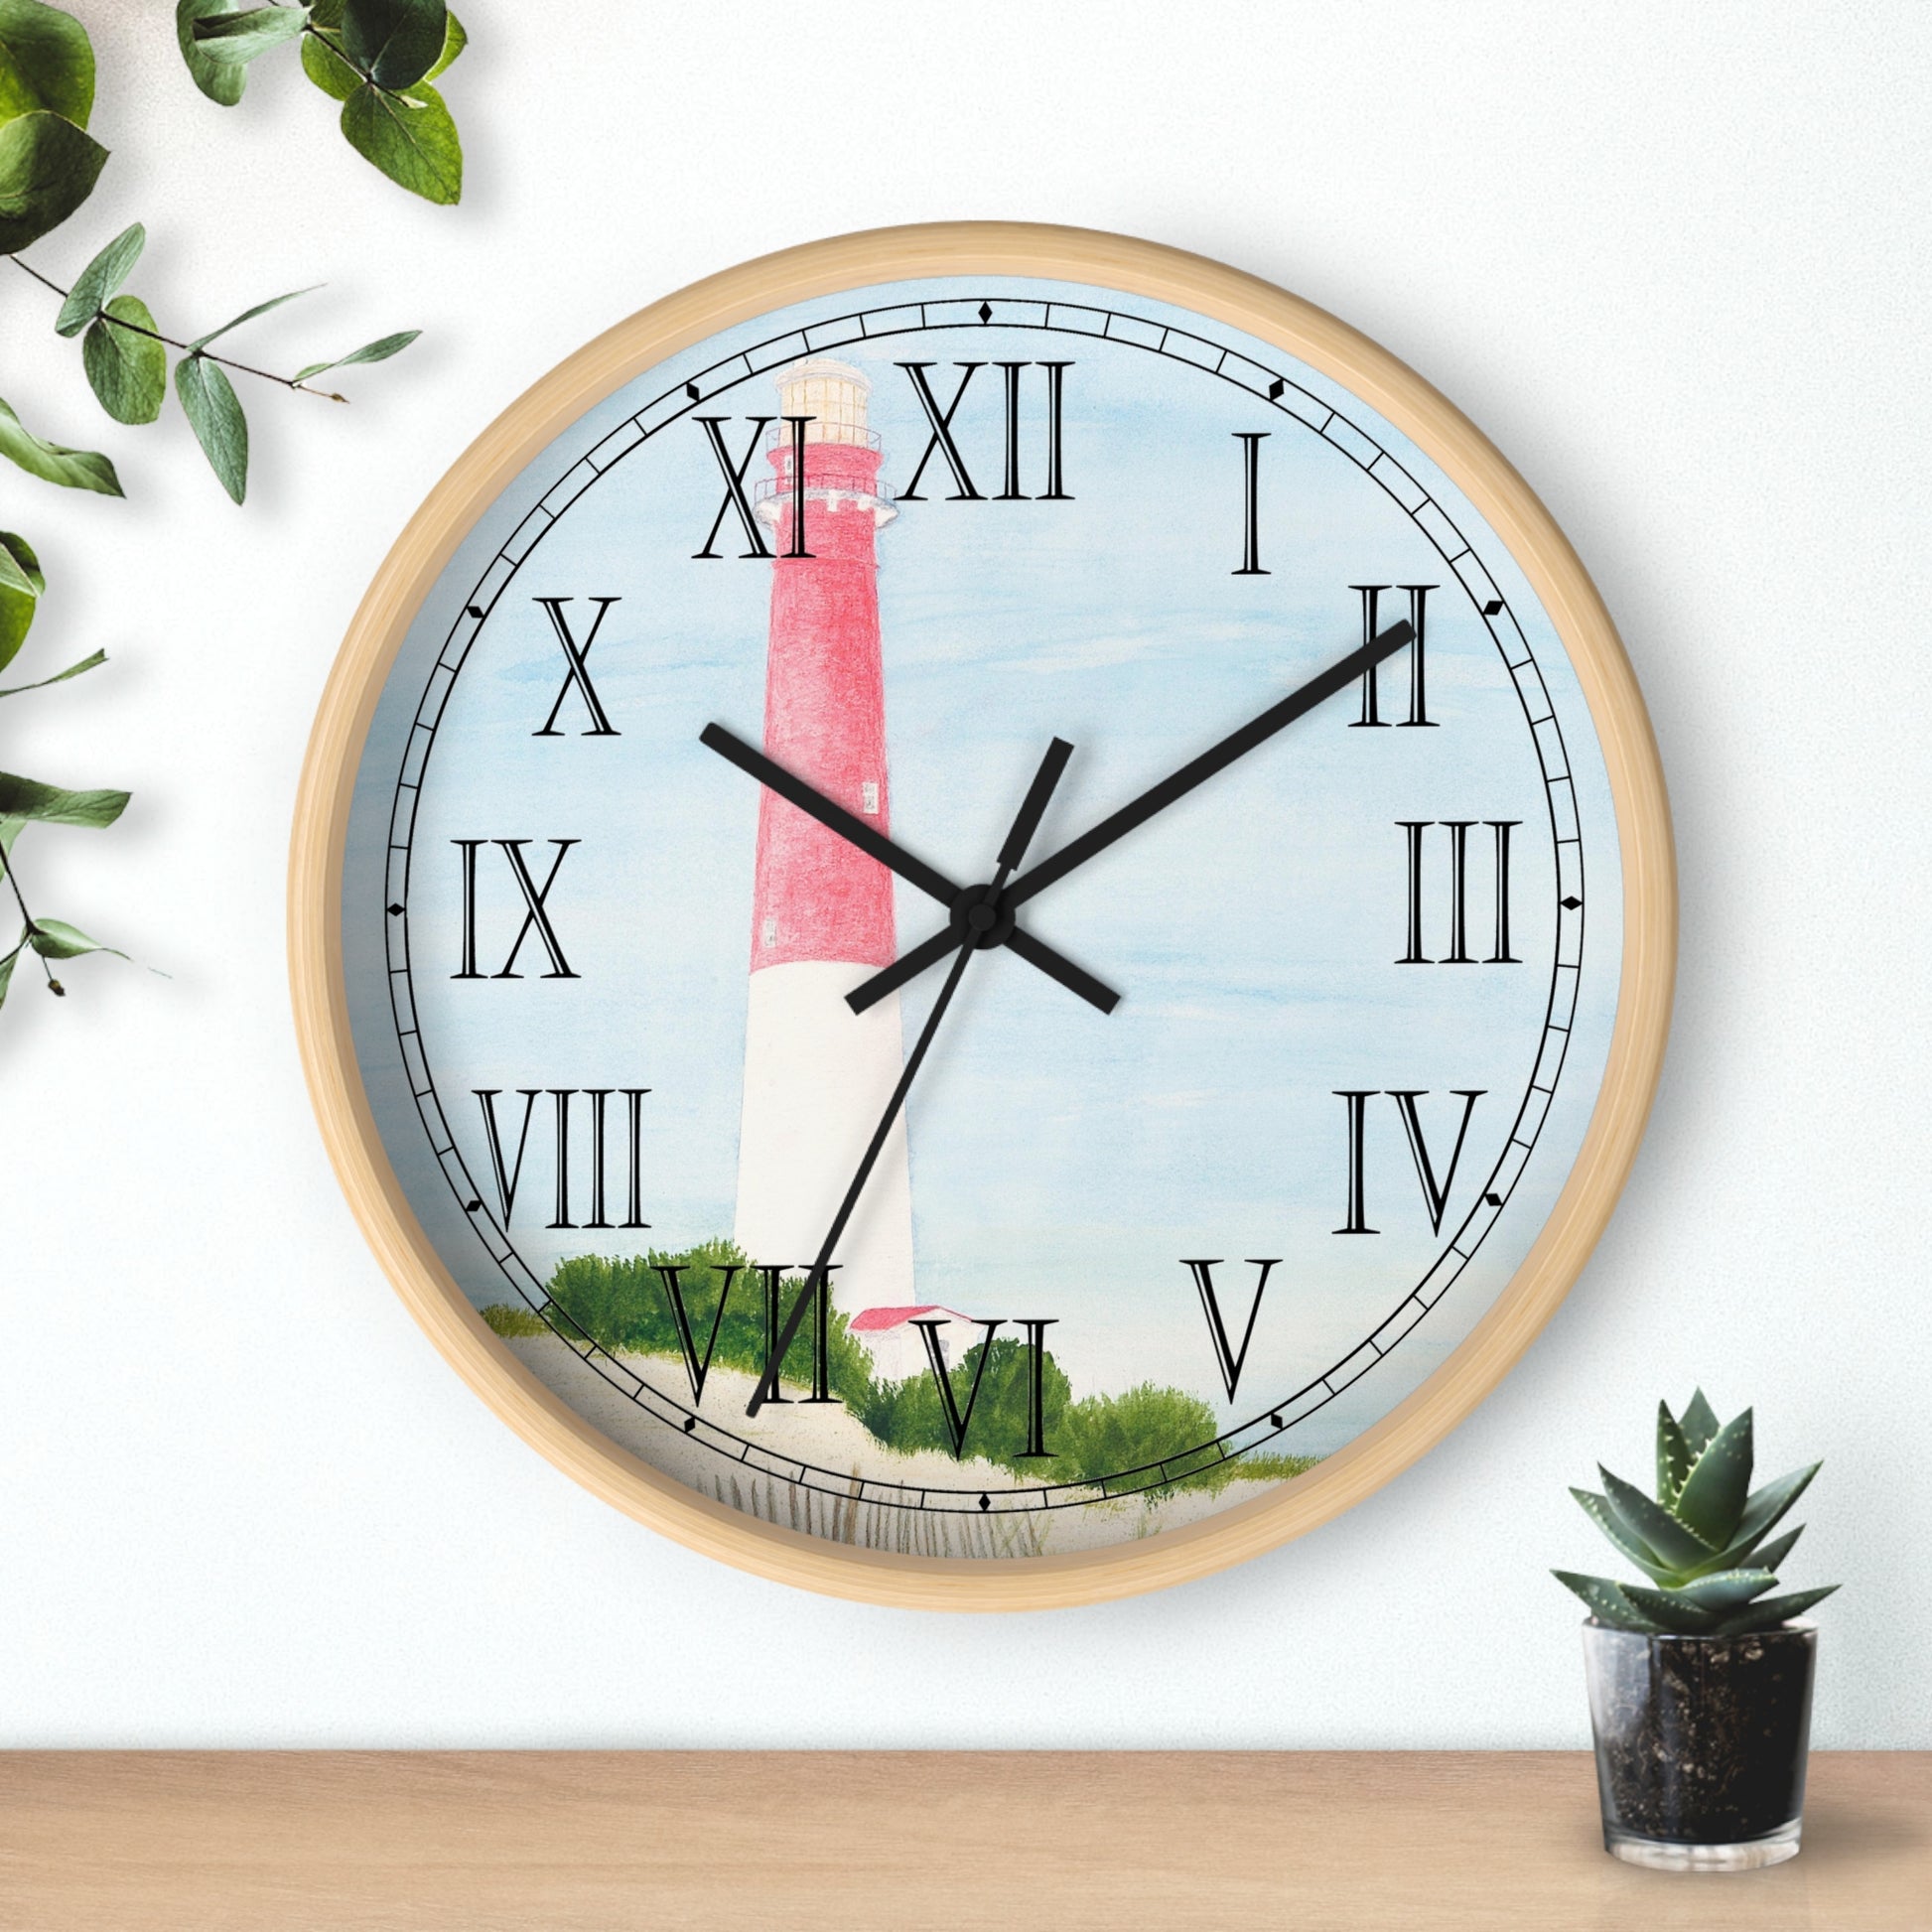 The Barnegat Lighthouse Roman Numeral Clock  will add a nautical touch to any room.